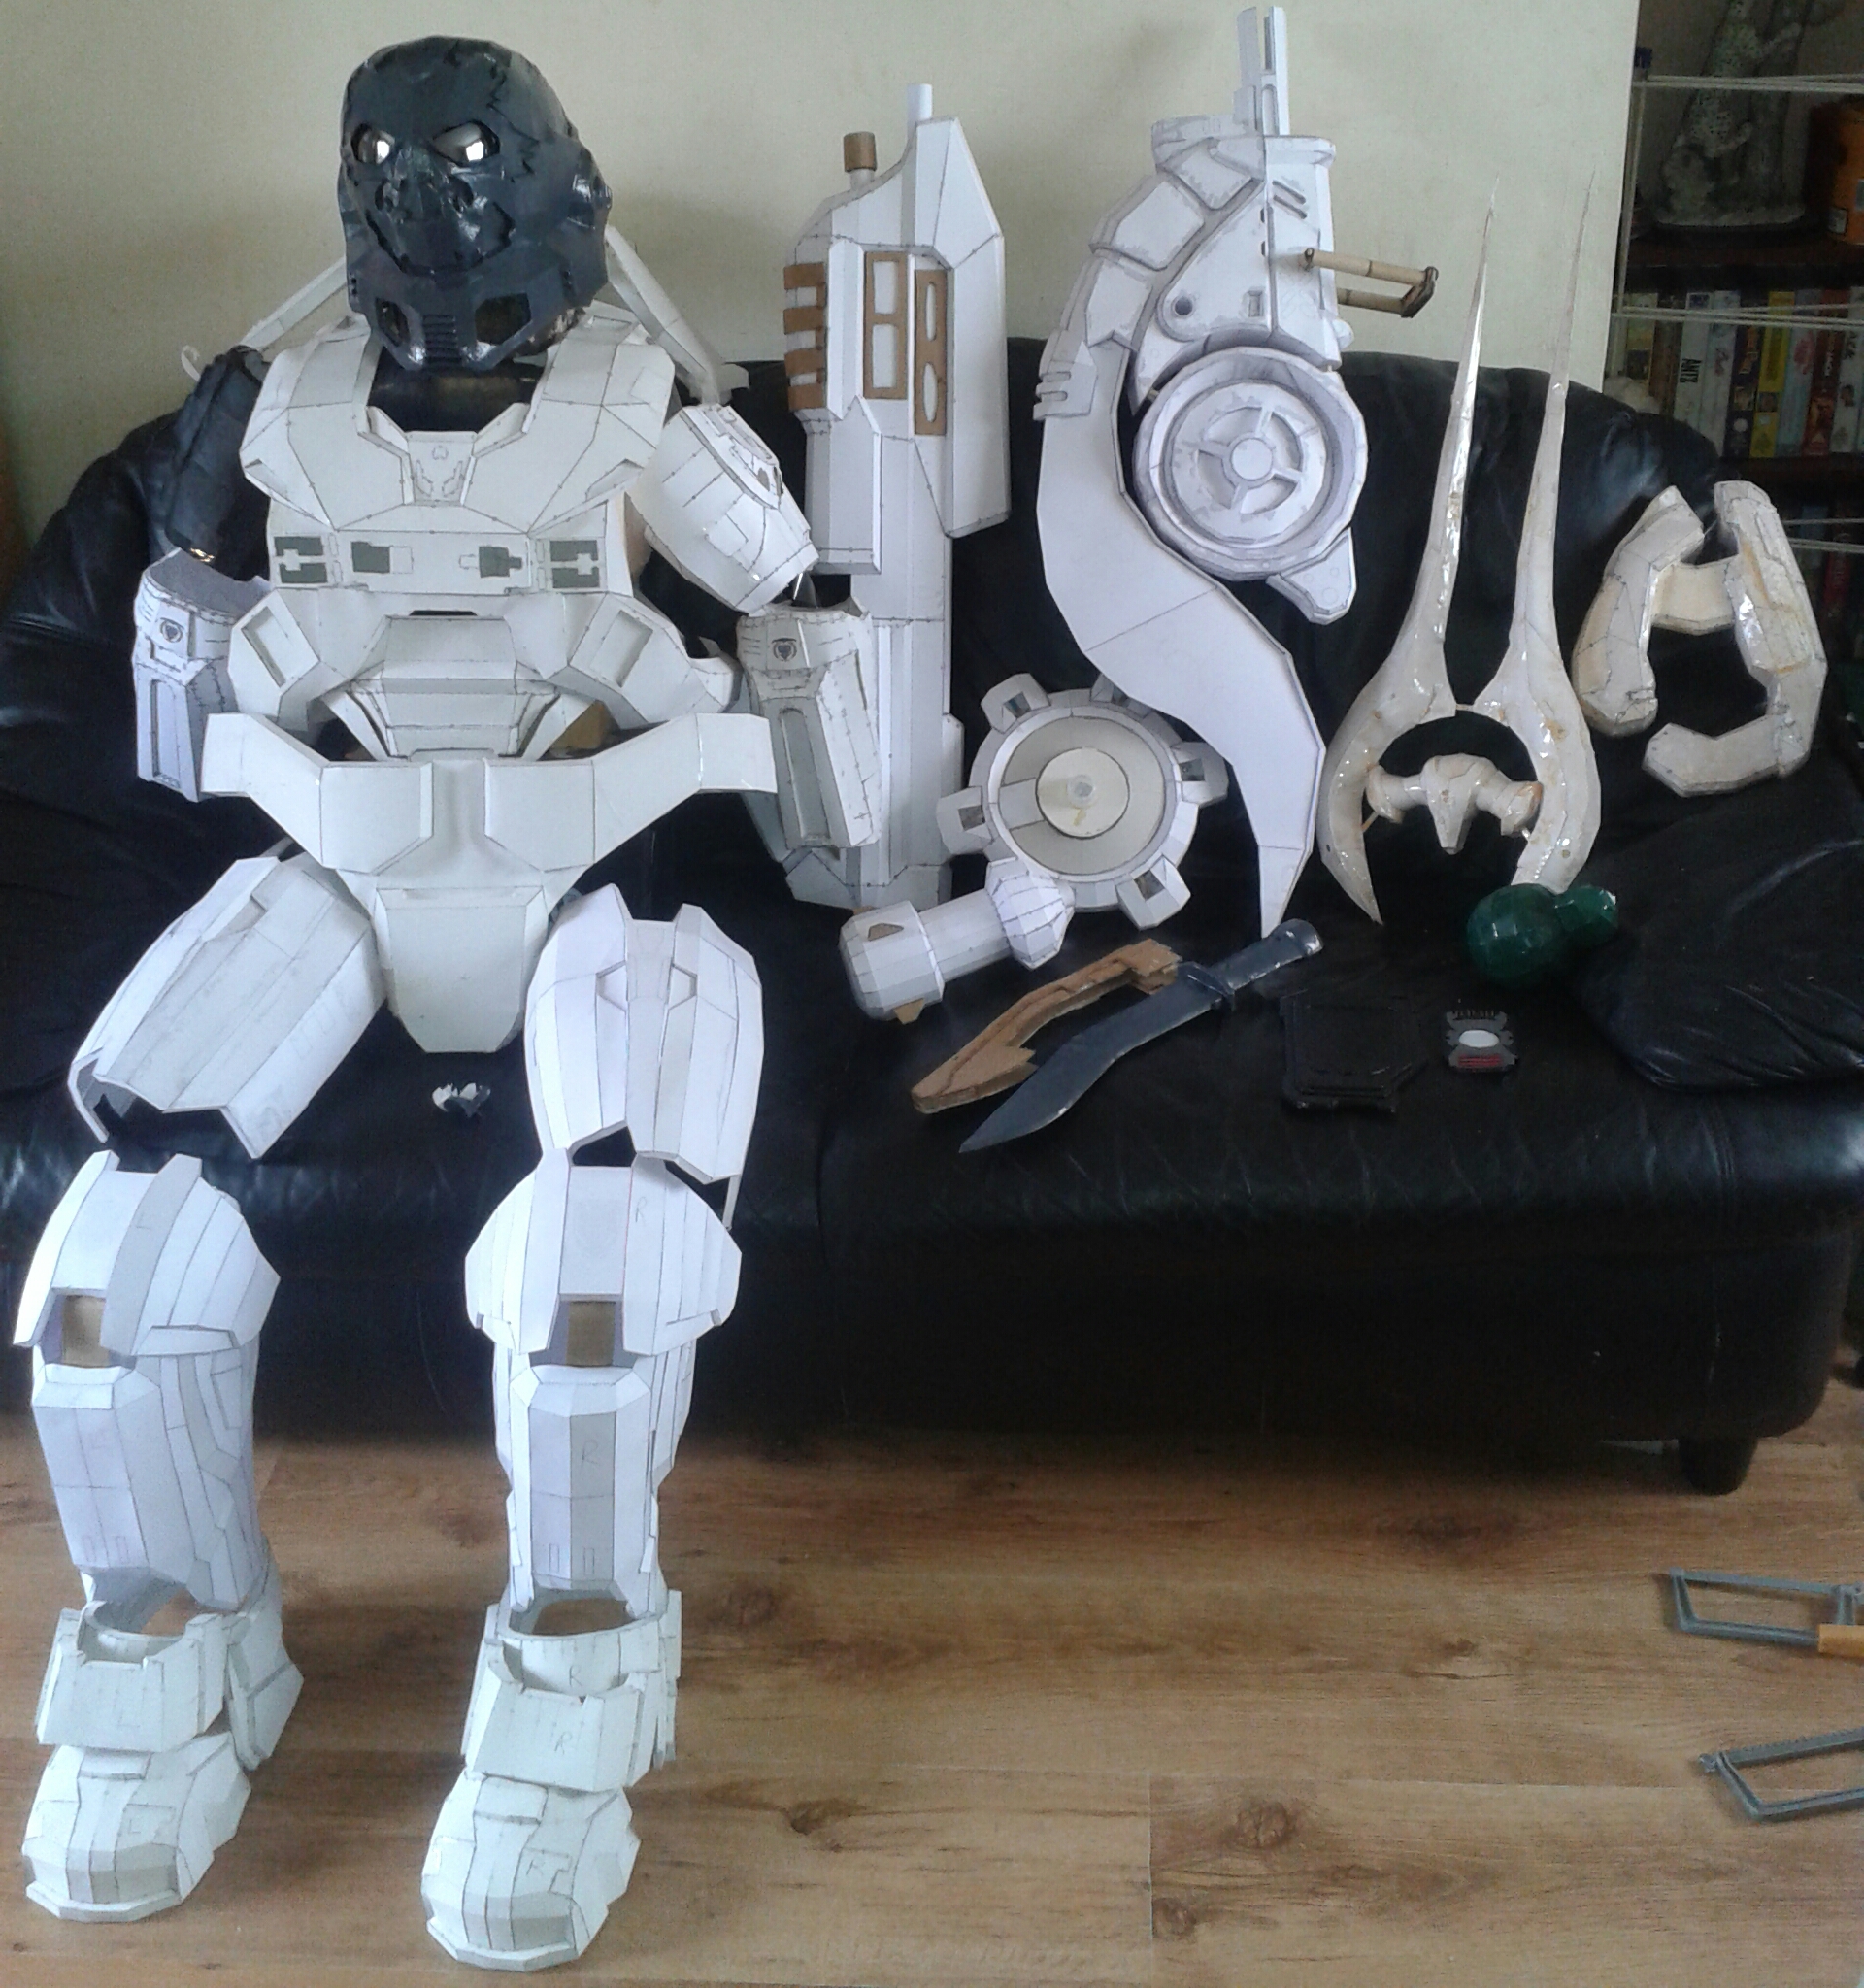 20150806 134602 1 | Halo Costume and Prop Maker Community - 405th